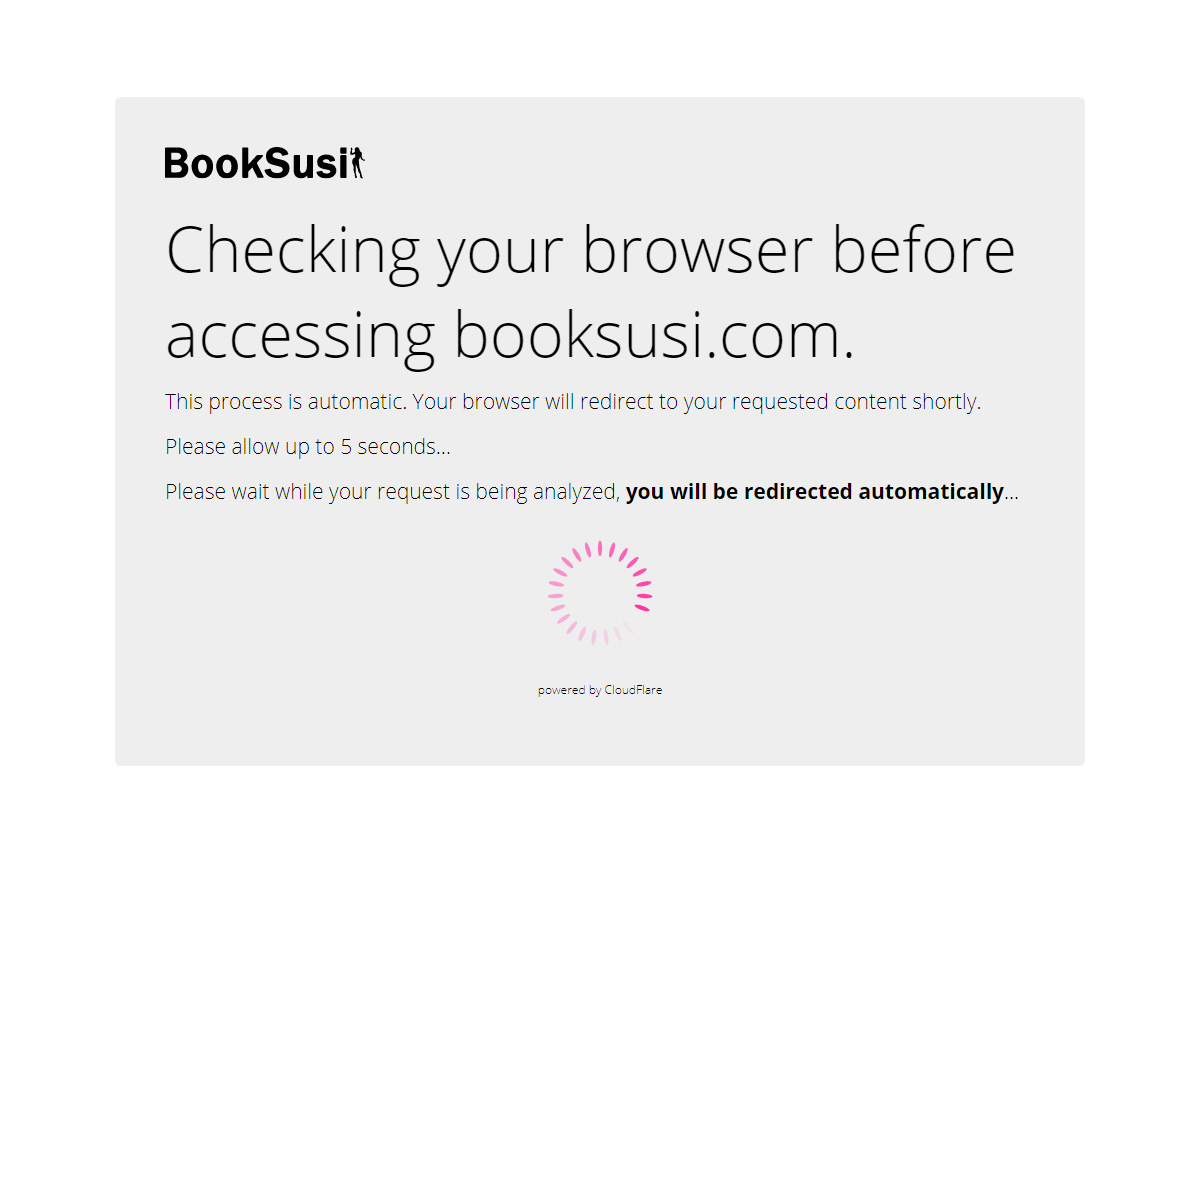 A complete backup of https://booksusi.com/hostessen/?&page=2